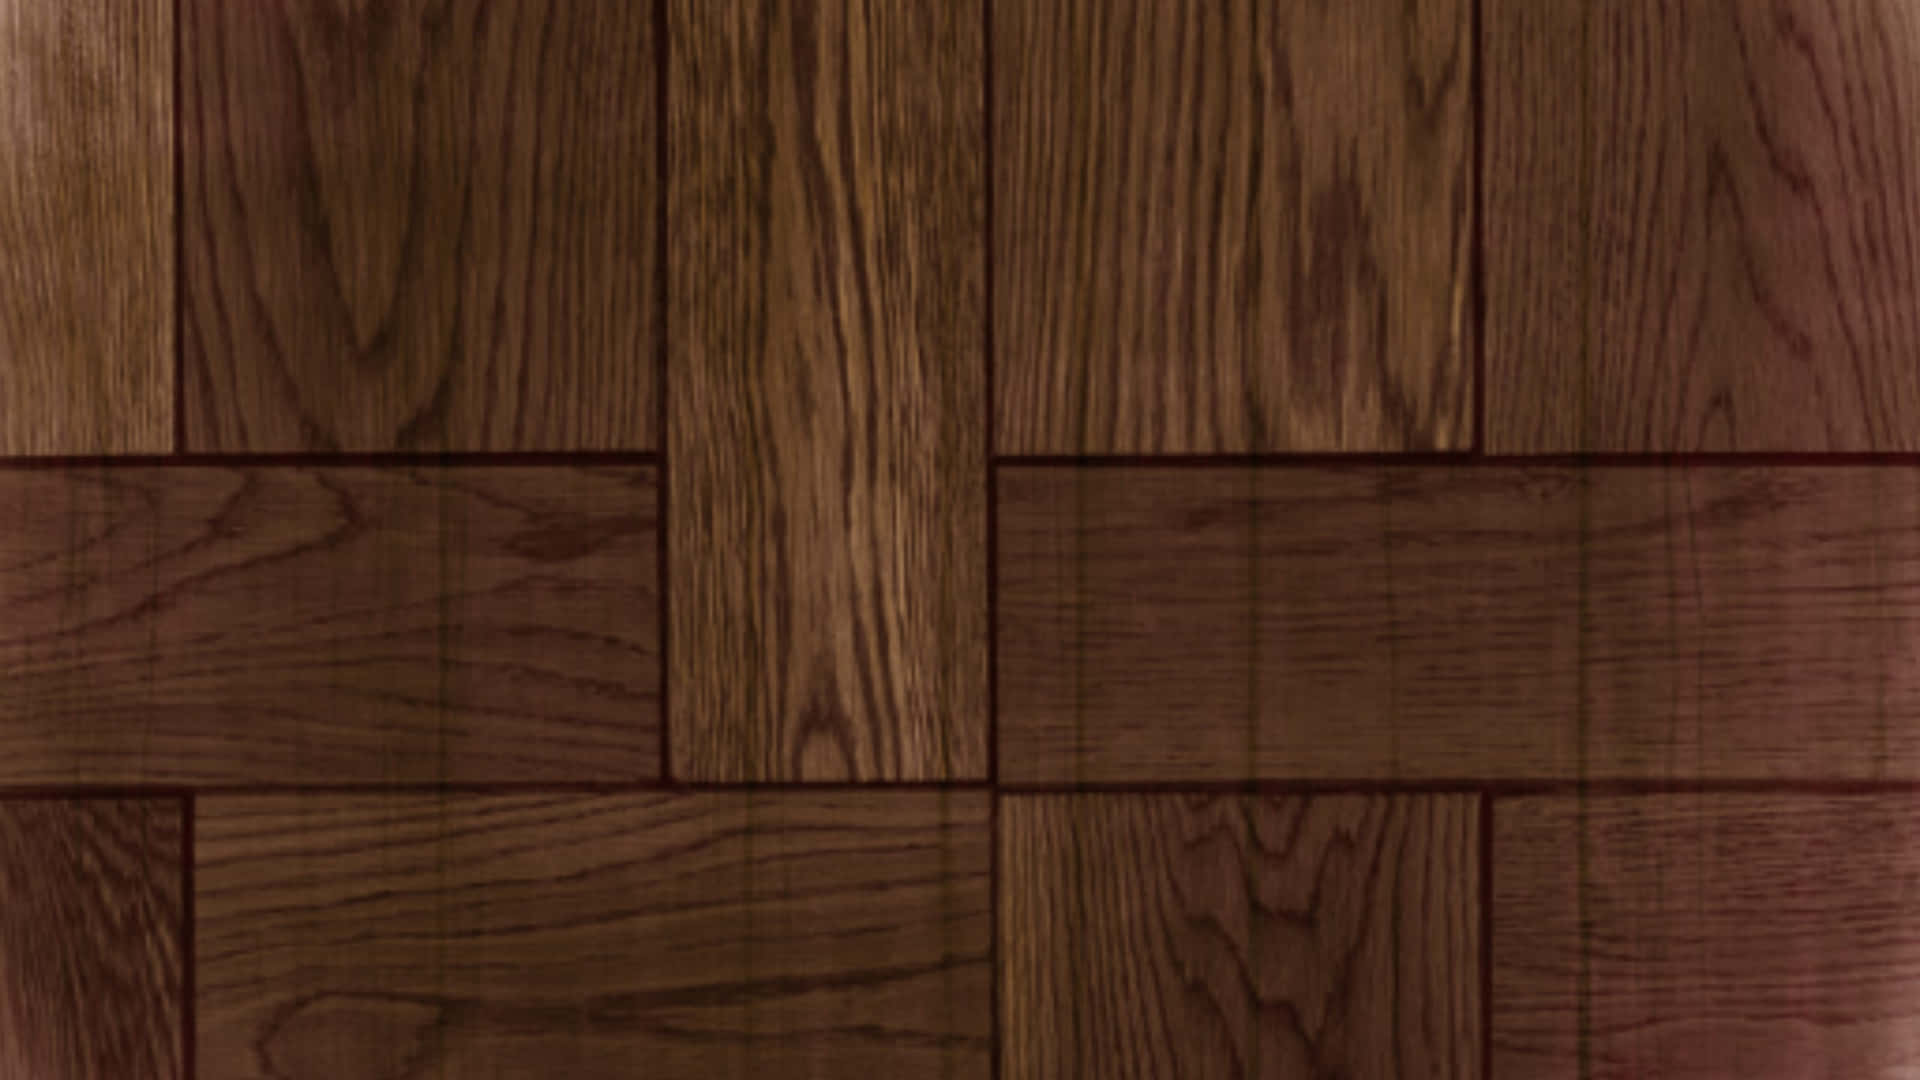 A Wooden Floor With A Brown Background